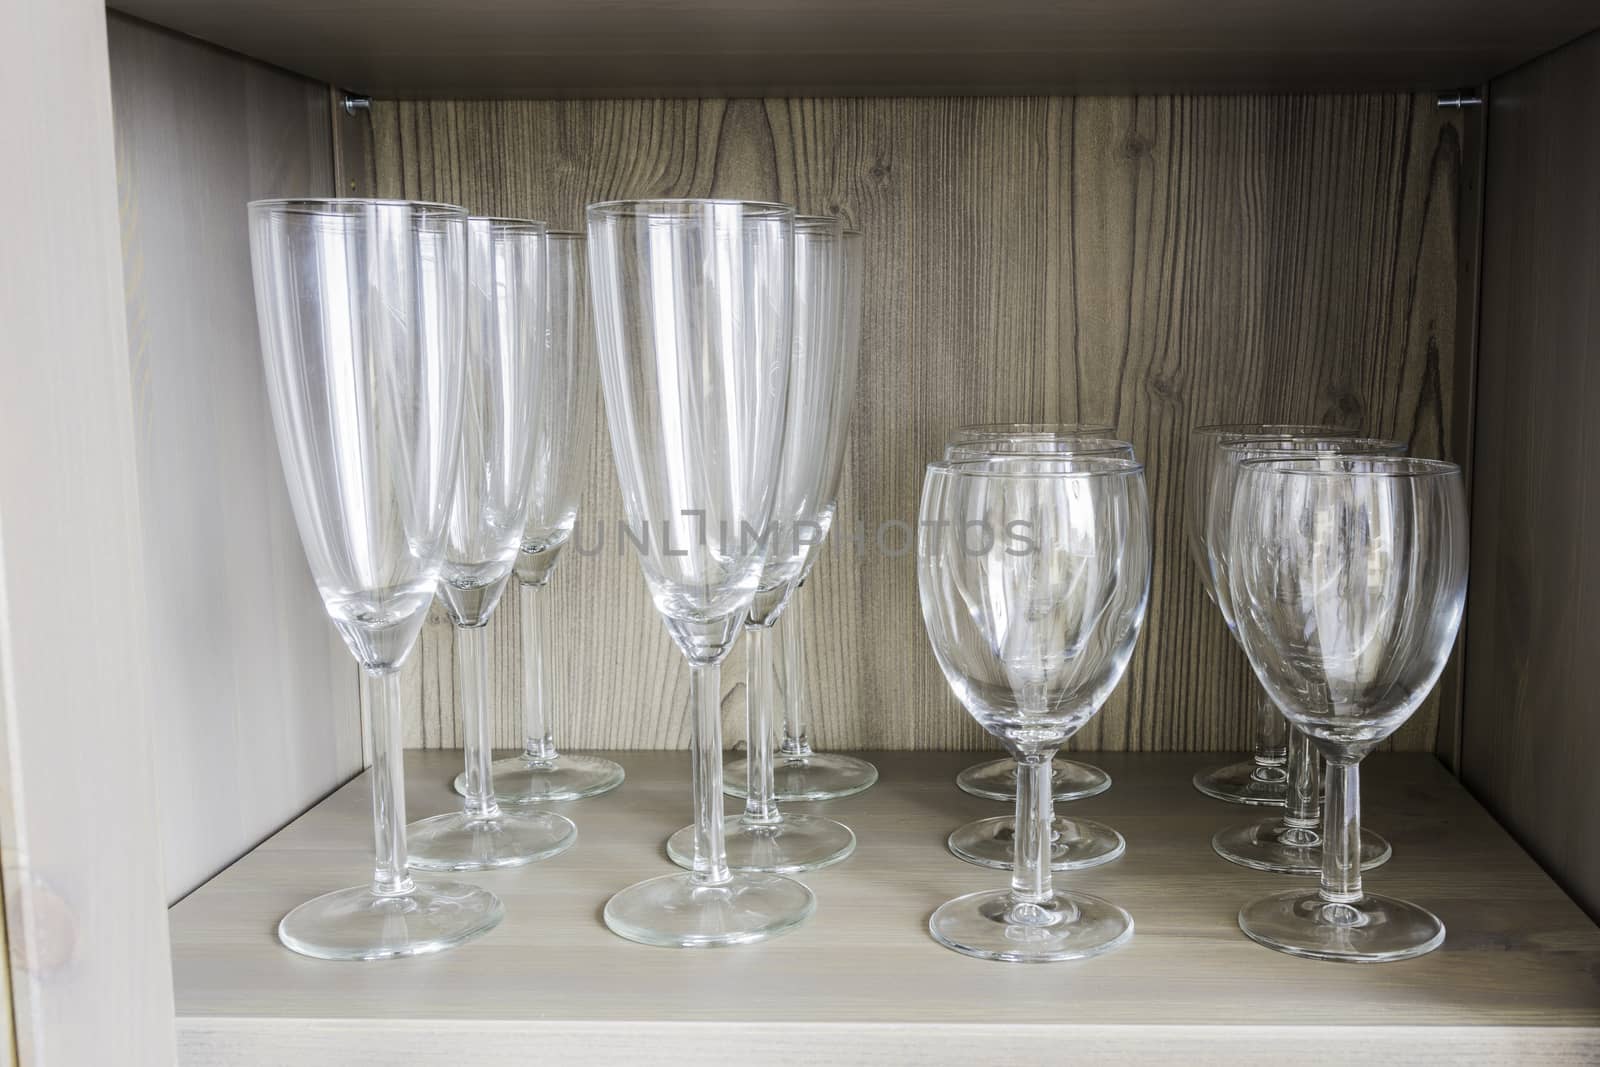 Collection of wine glasses on a wooden shelf